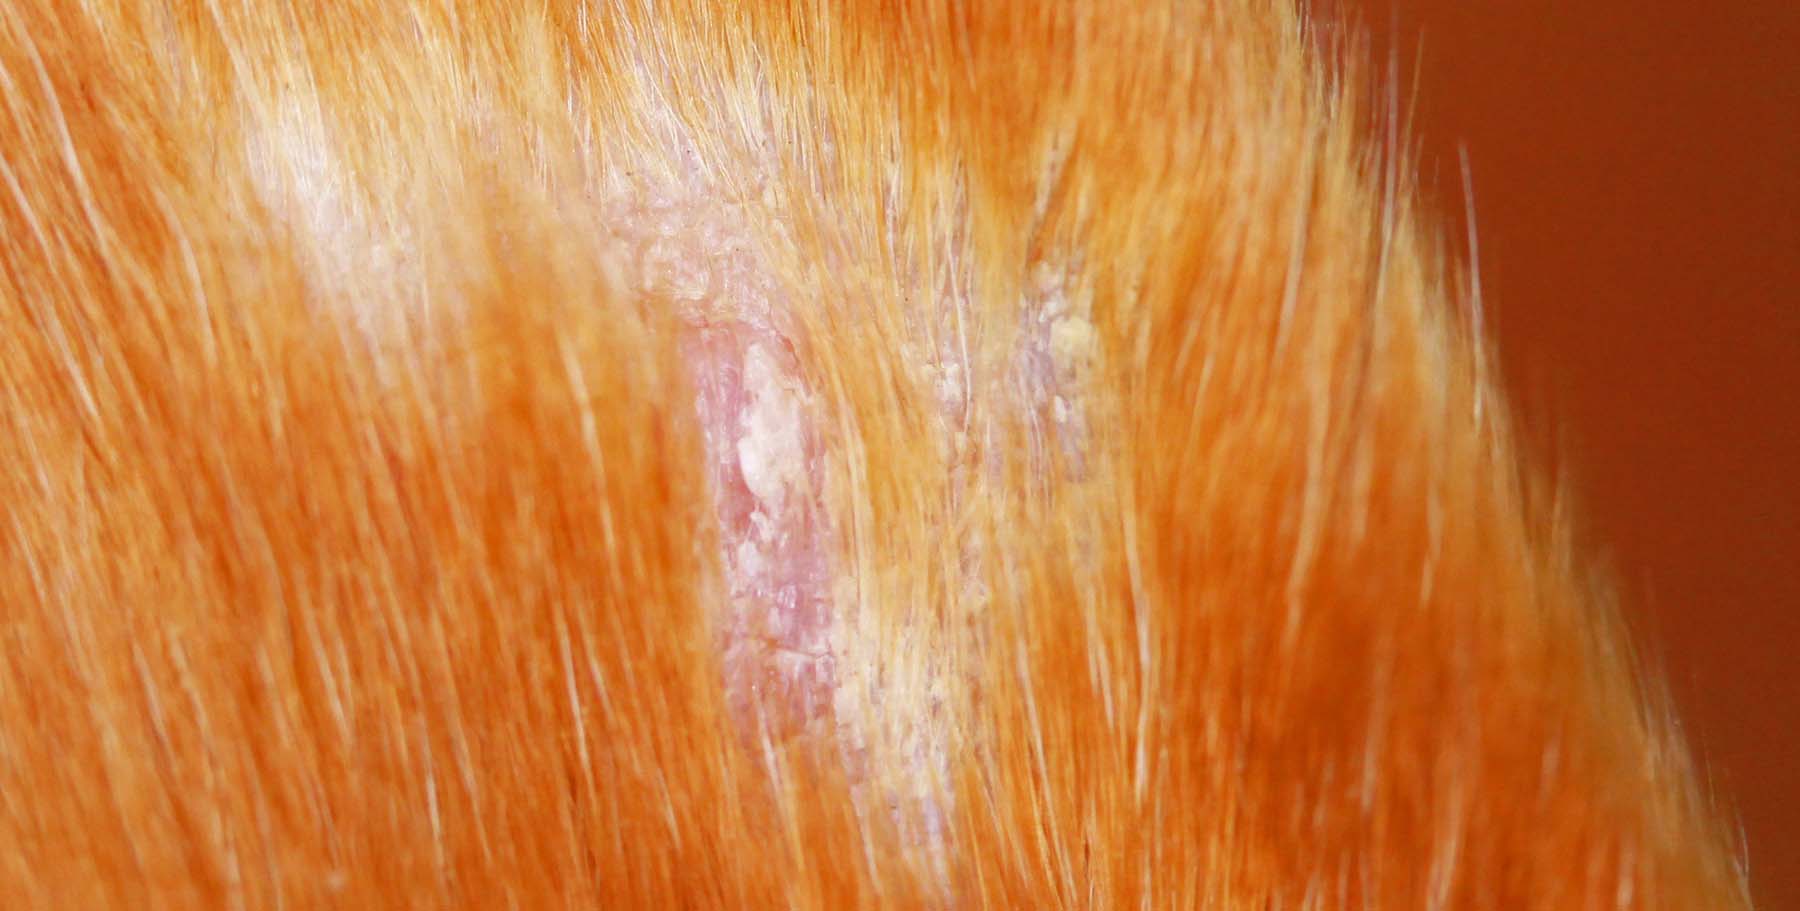 Dermatophytosis (Ringworm) or Superficial Bacterial Infection or Leishmaniosis?